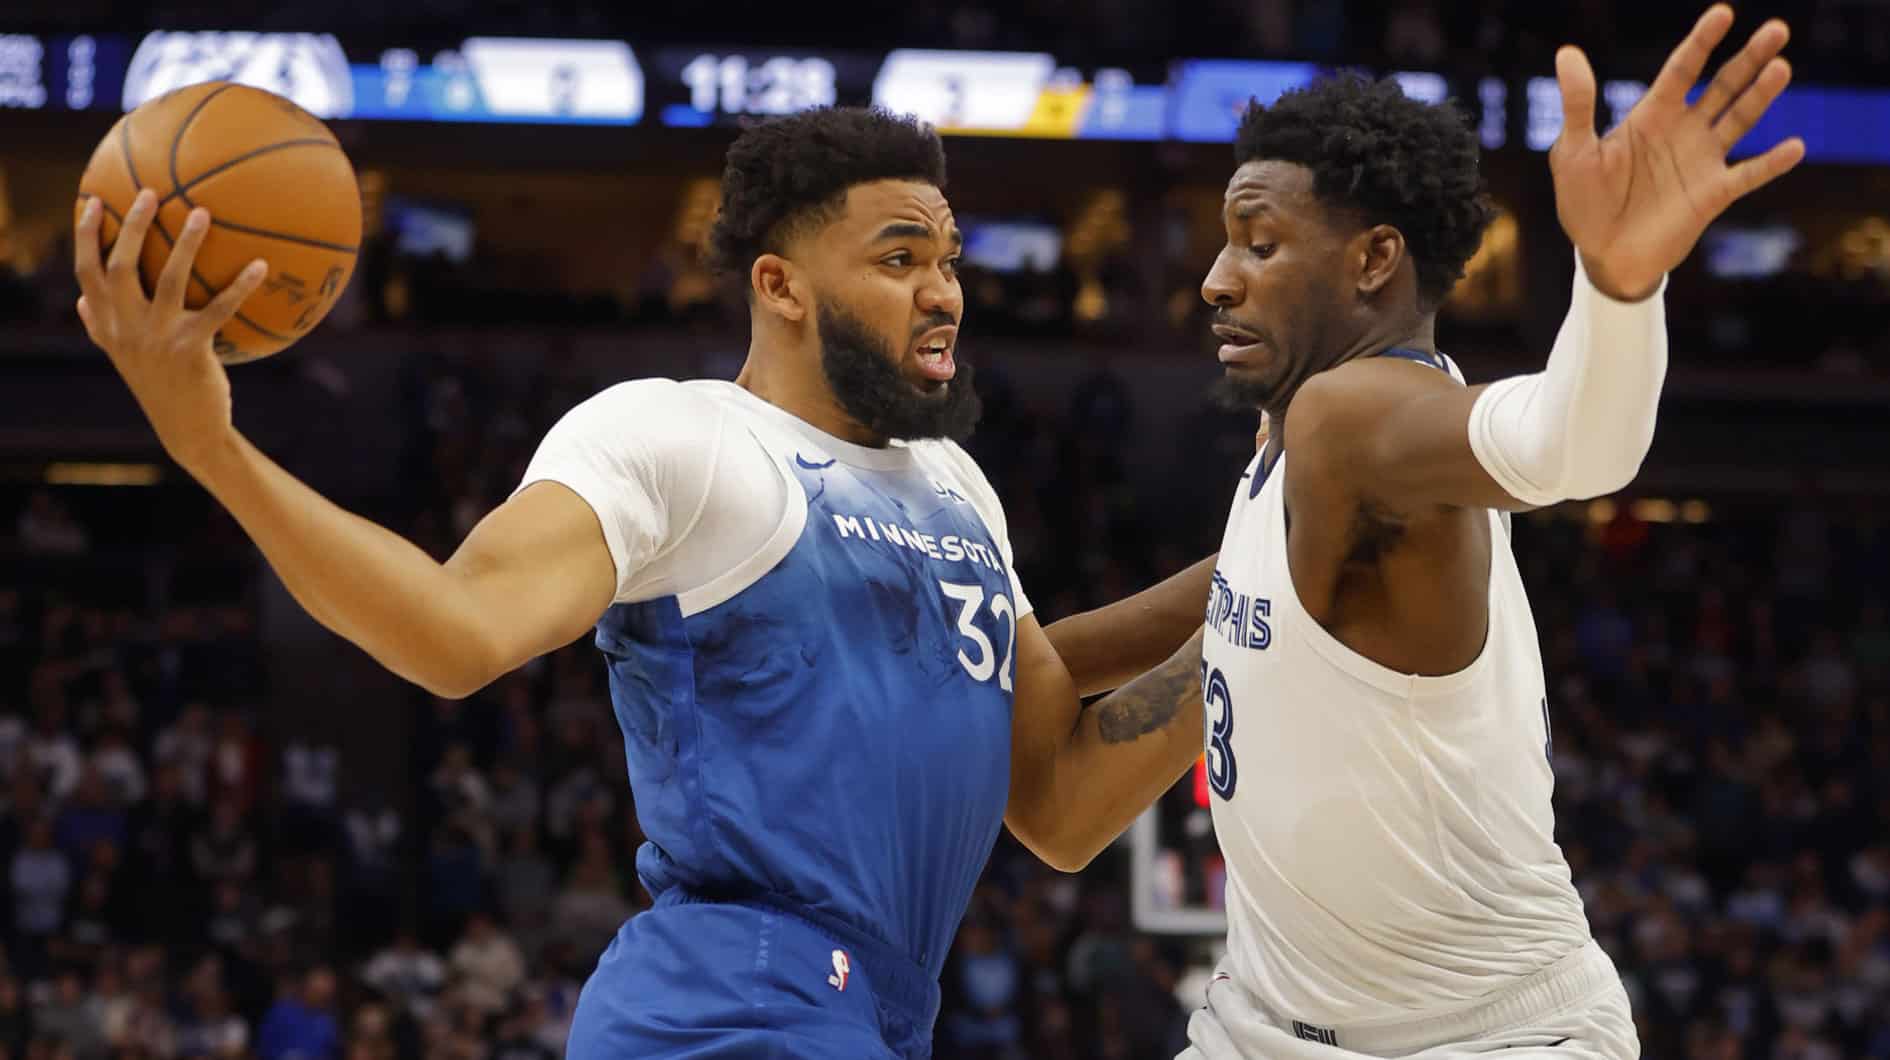 Minnesota Timberwolves forward Karl-Anthony Towns (32) goes against Memphis Grizzlies forward Jaren Jackson Jr. (13) in the first quarter at Target Center. 